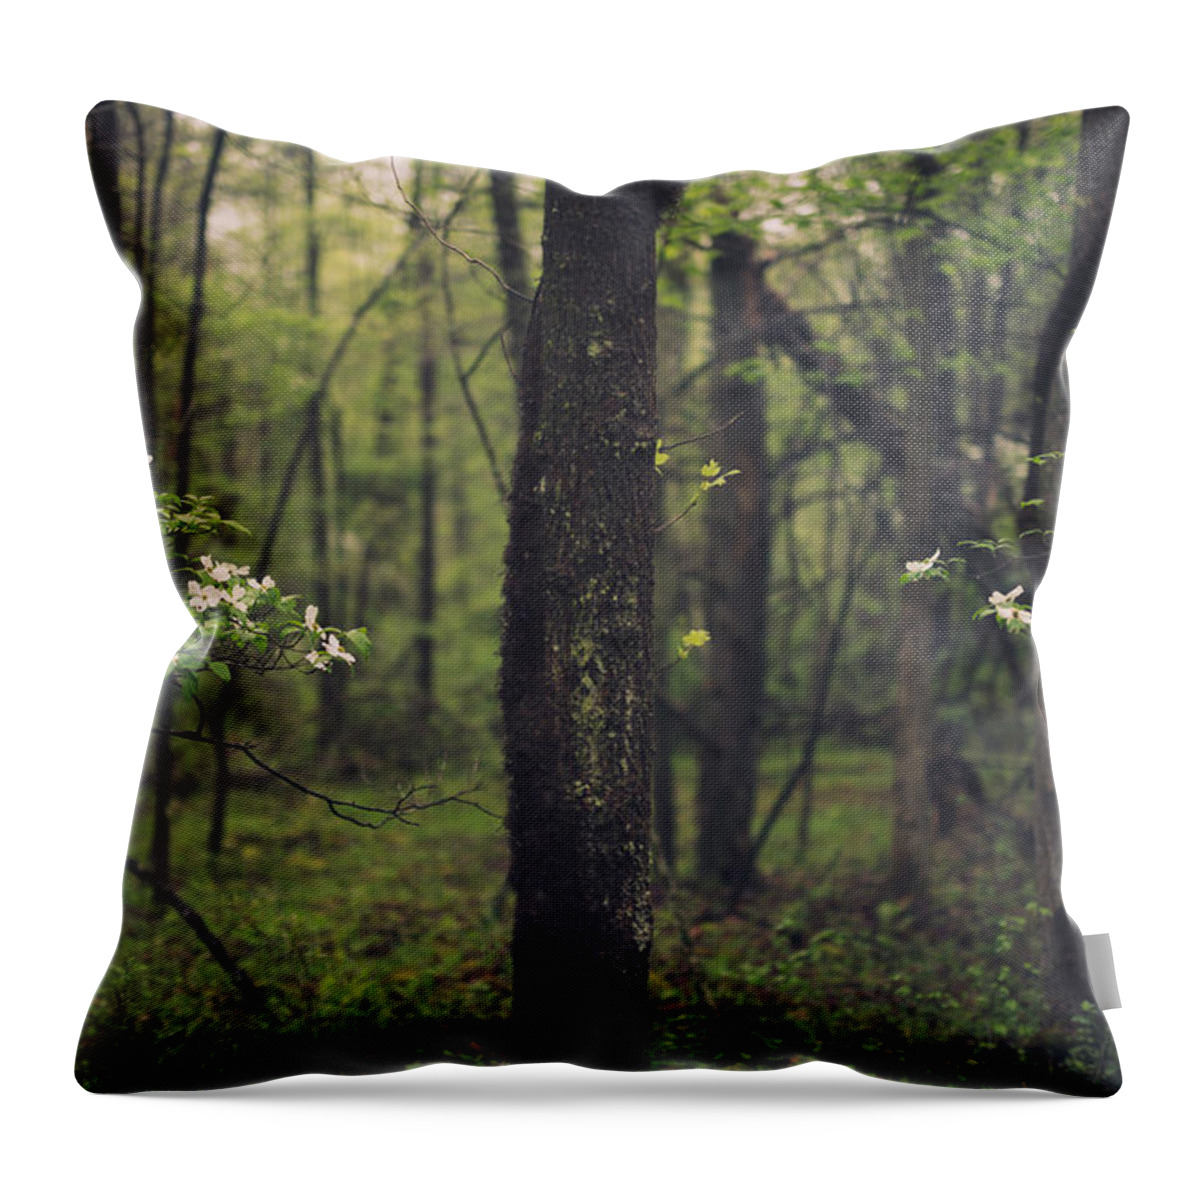 Dogwood Throw Pillow featuring the photograph Between The Dogwoods by Shane Holsclaw